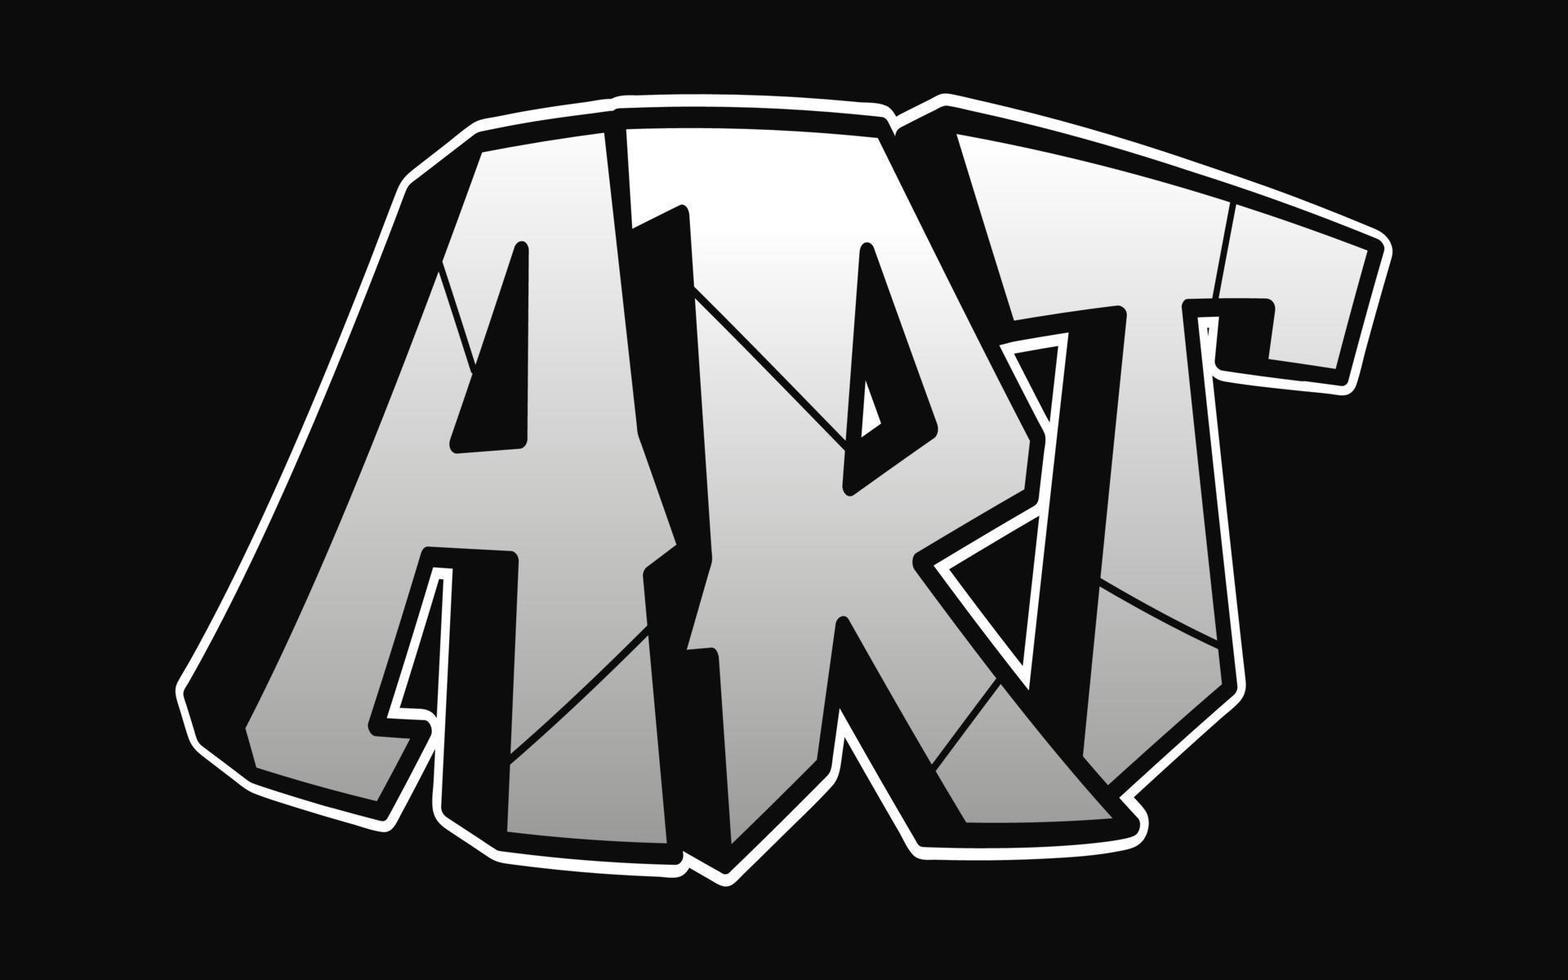 Art word graffiti style letters.Vector hand drawn doodle cartoon logo illustration.Funny cool Art letters, fashion, graffiti style print for t-shirt, poster concept vector